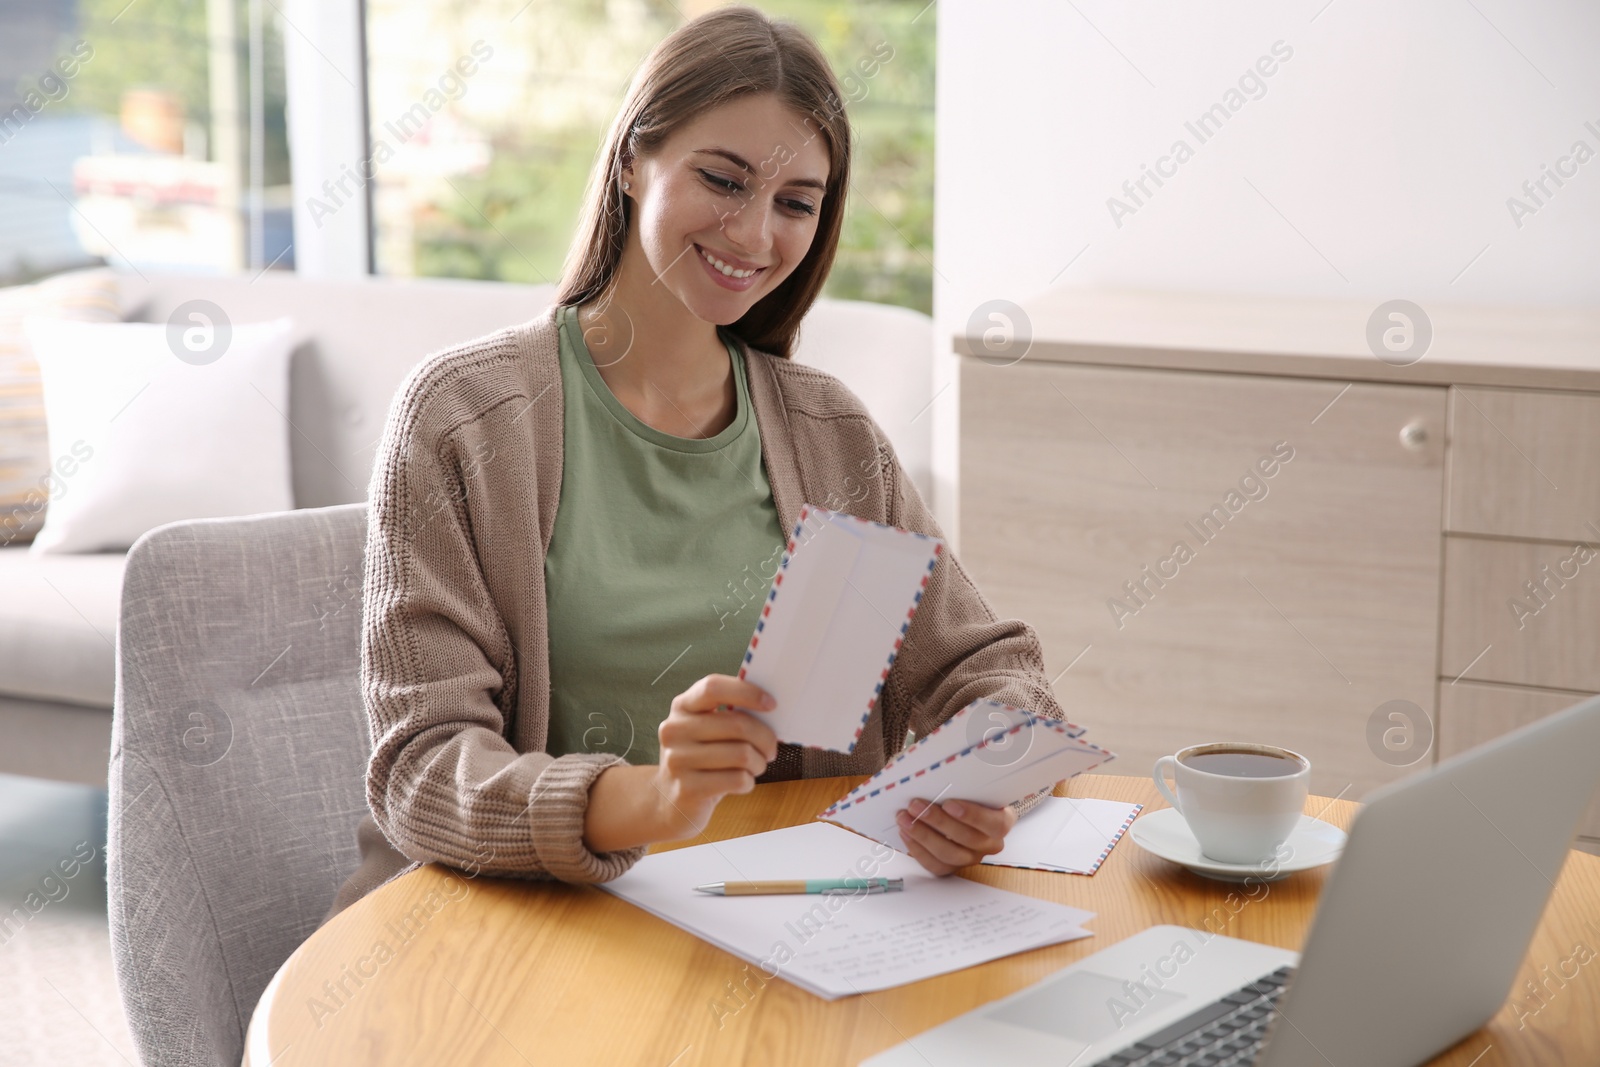 Photo of Woman with letter at wooden table in room